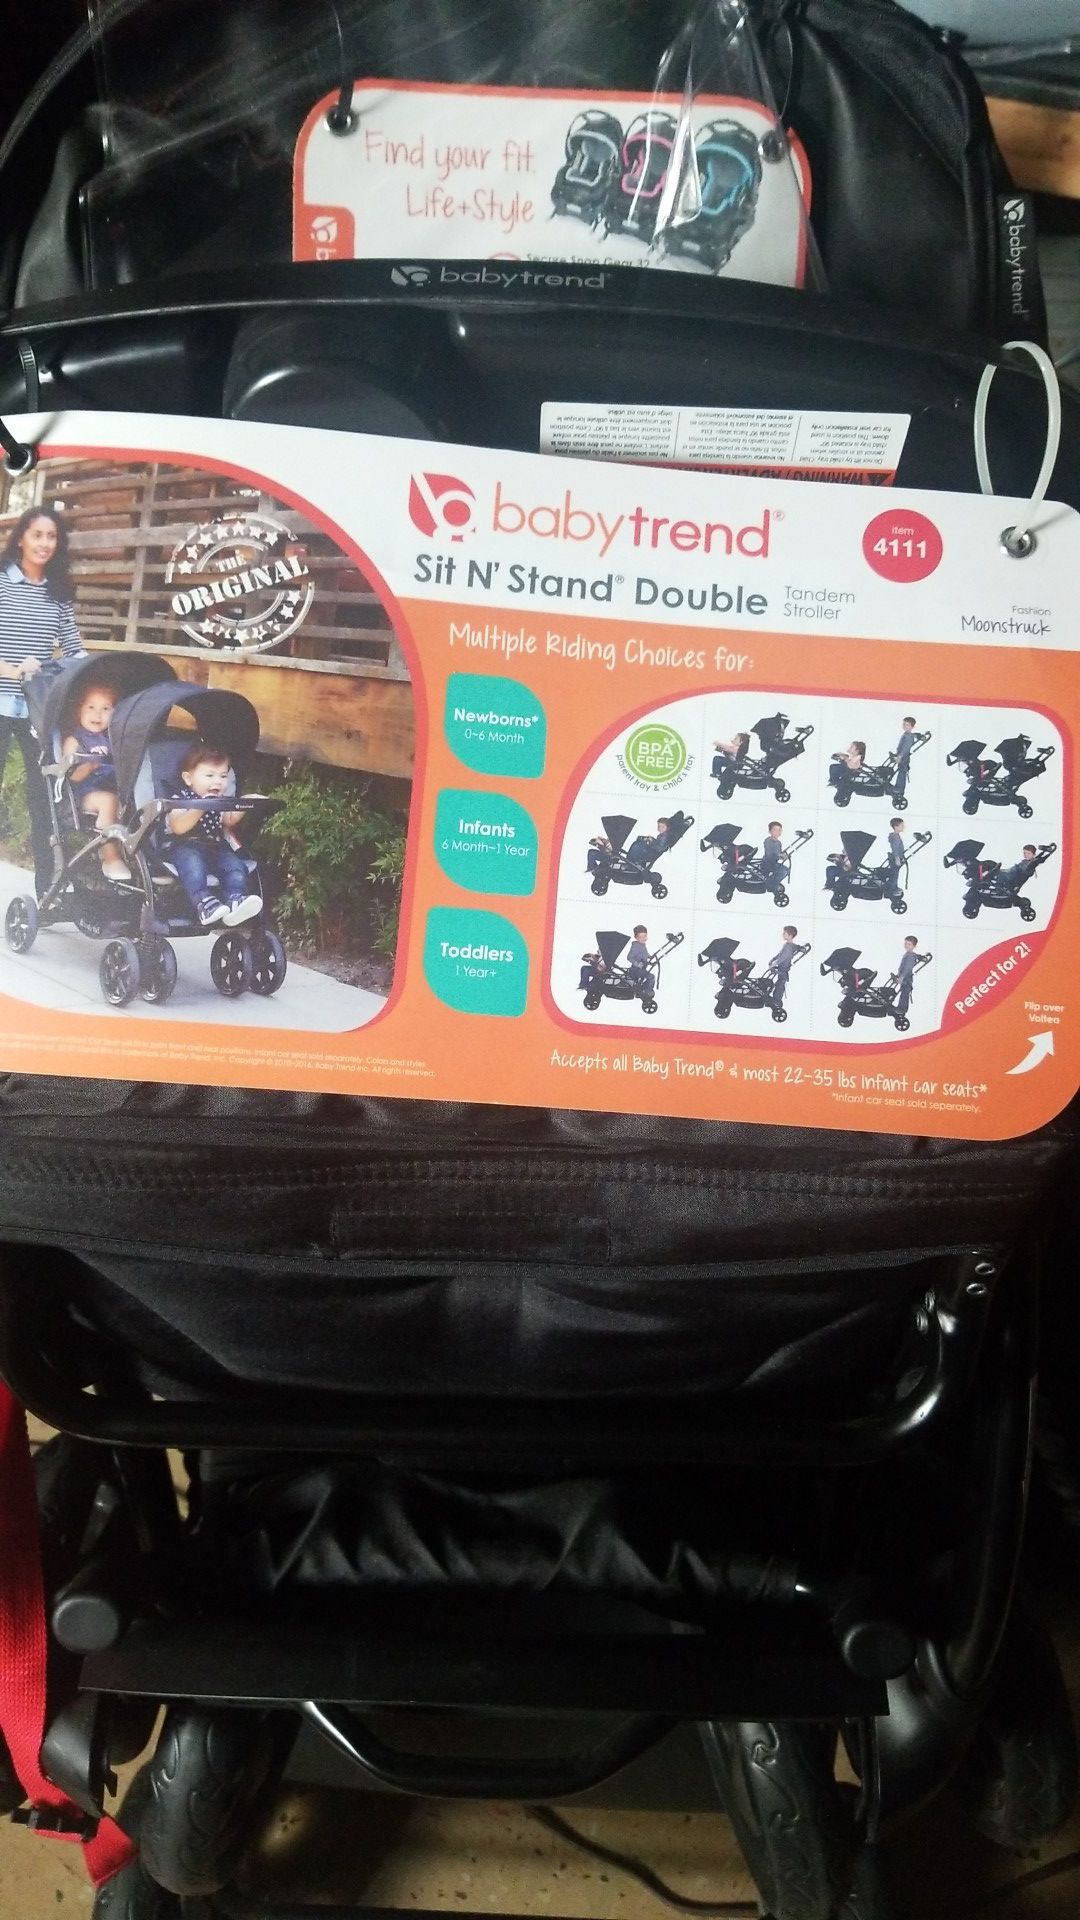 New! Baby Trend: Baby Sit and Stand Double Stroller